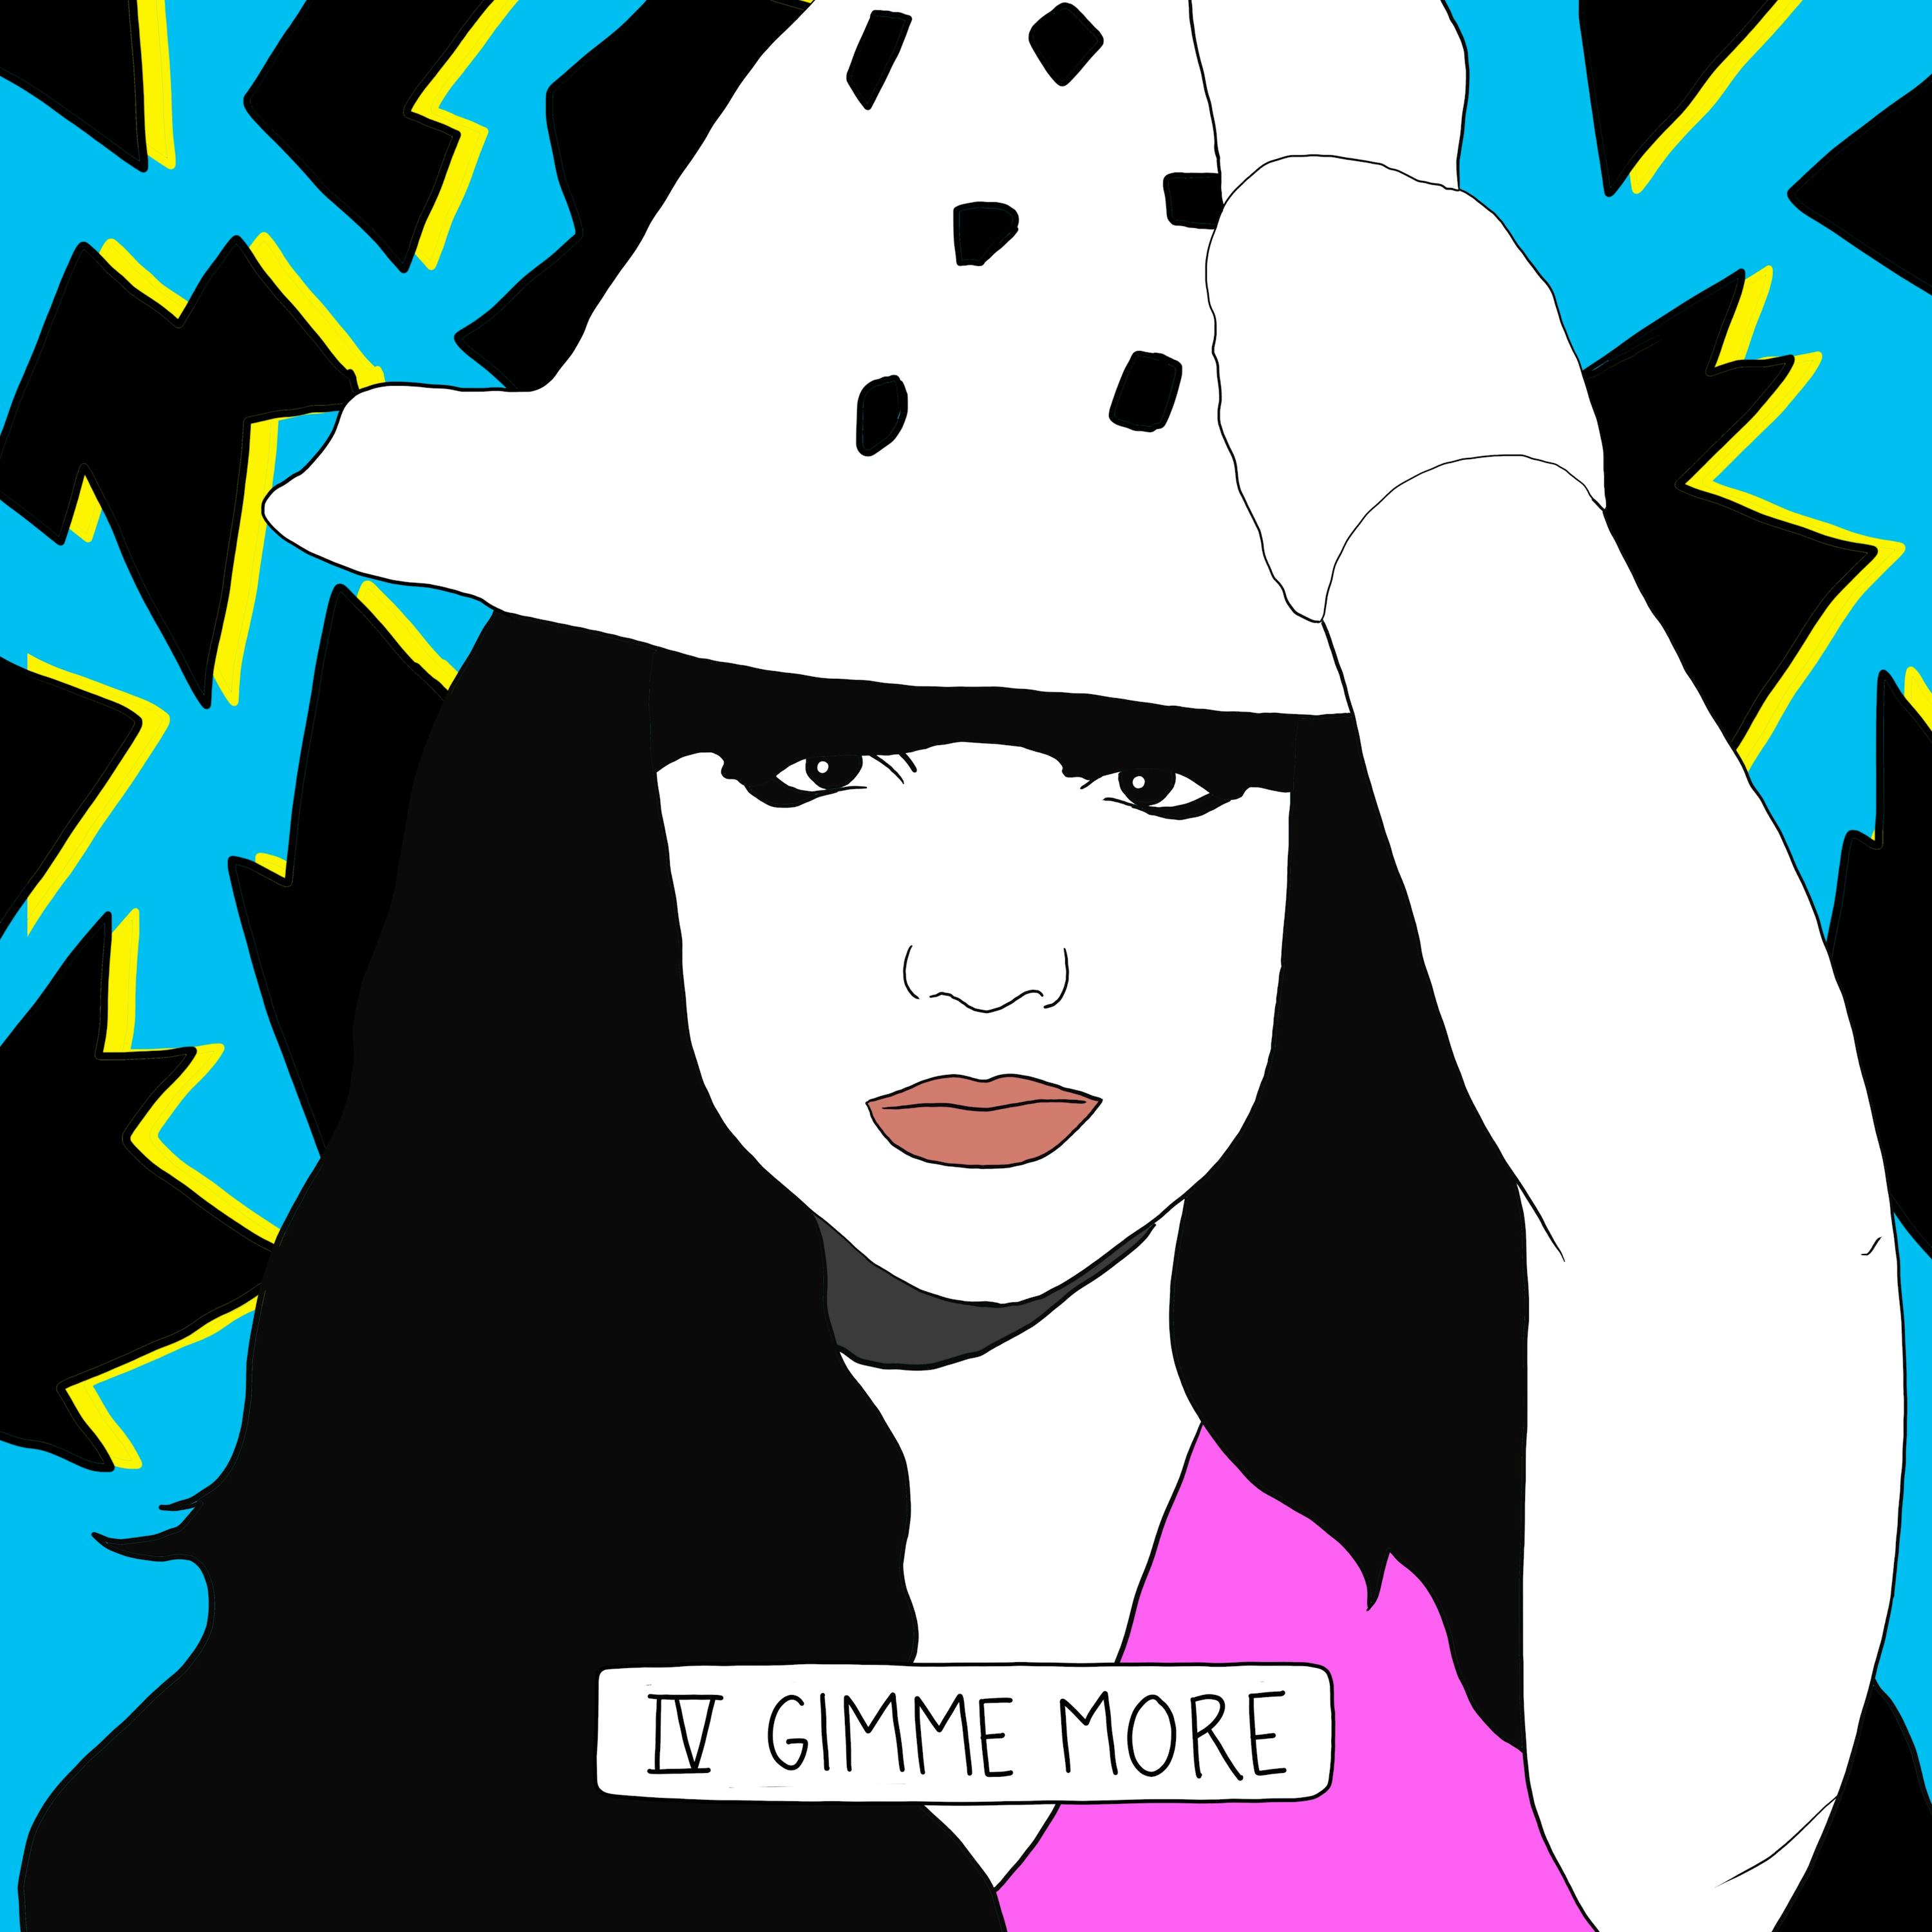 Listening 2 Britney: Gimme More